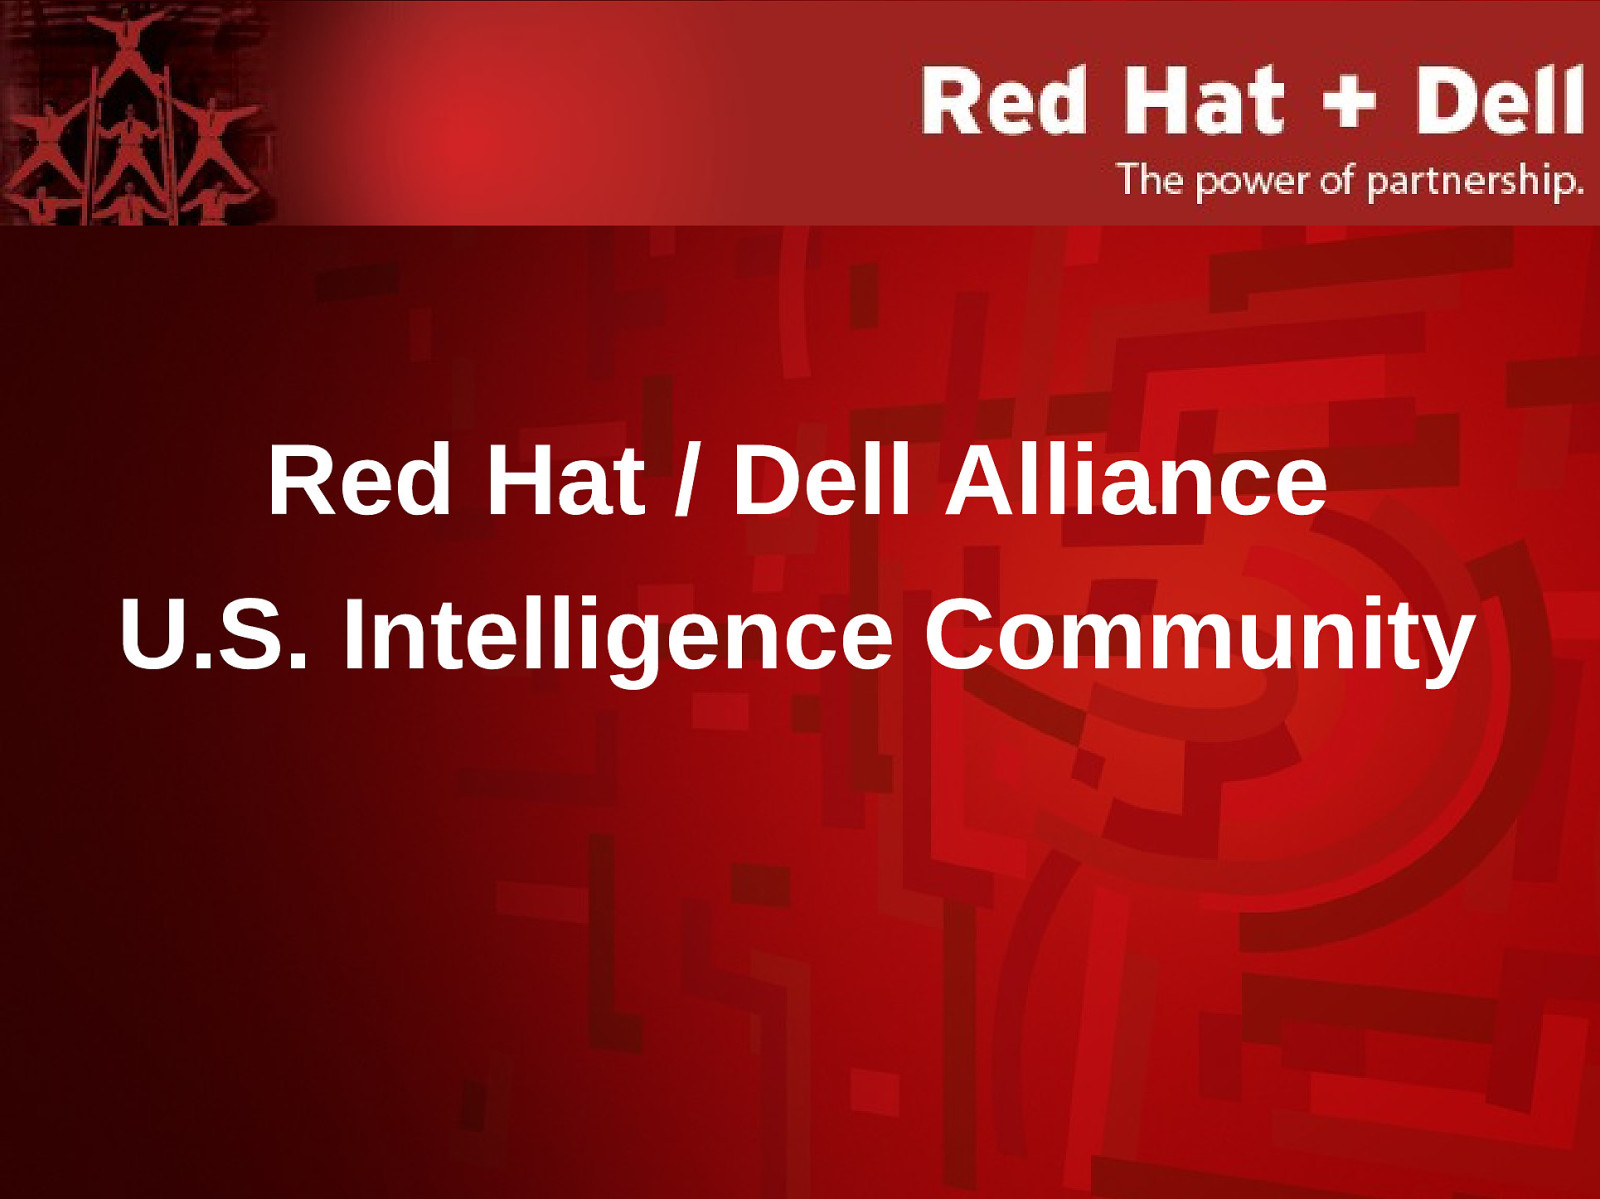 Dell / Red Hat Alliance in the U.S. Intelligence Community